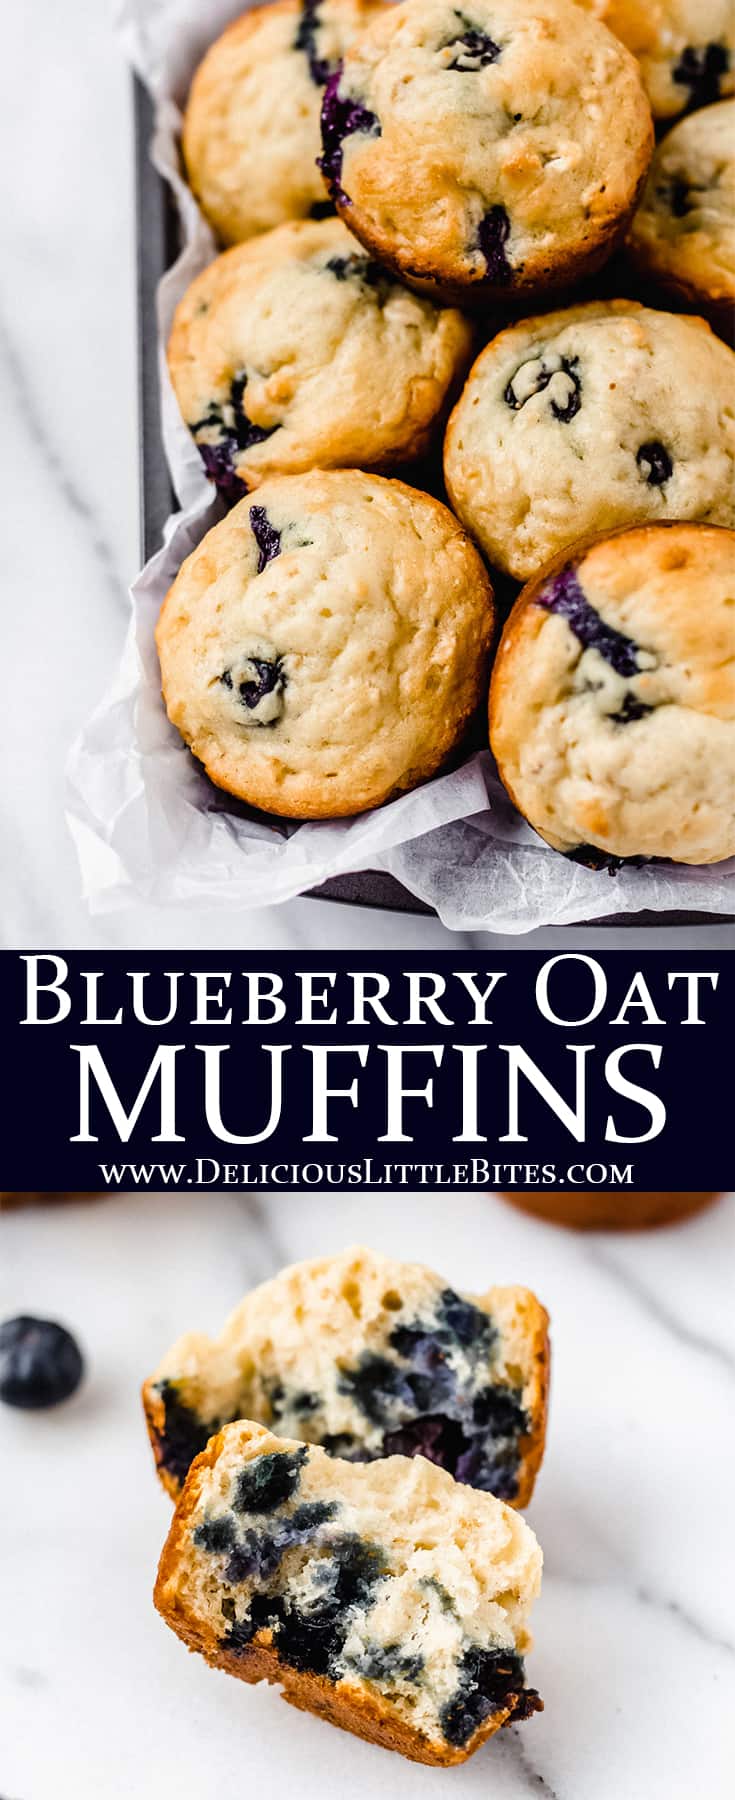 Blueberry Oat Muffins - Delicious Little Bites